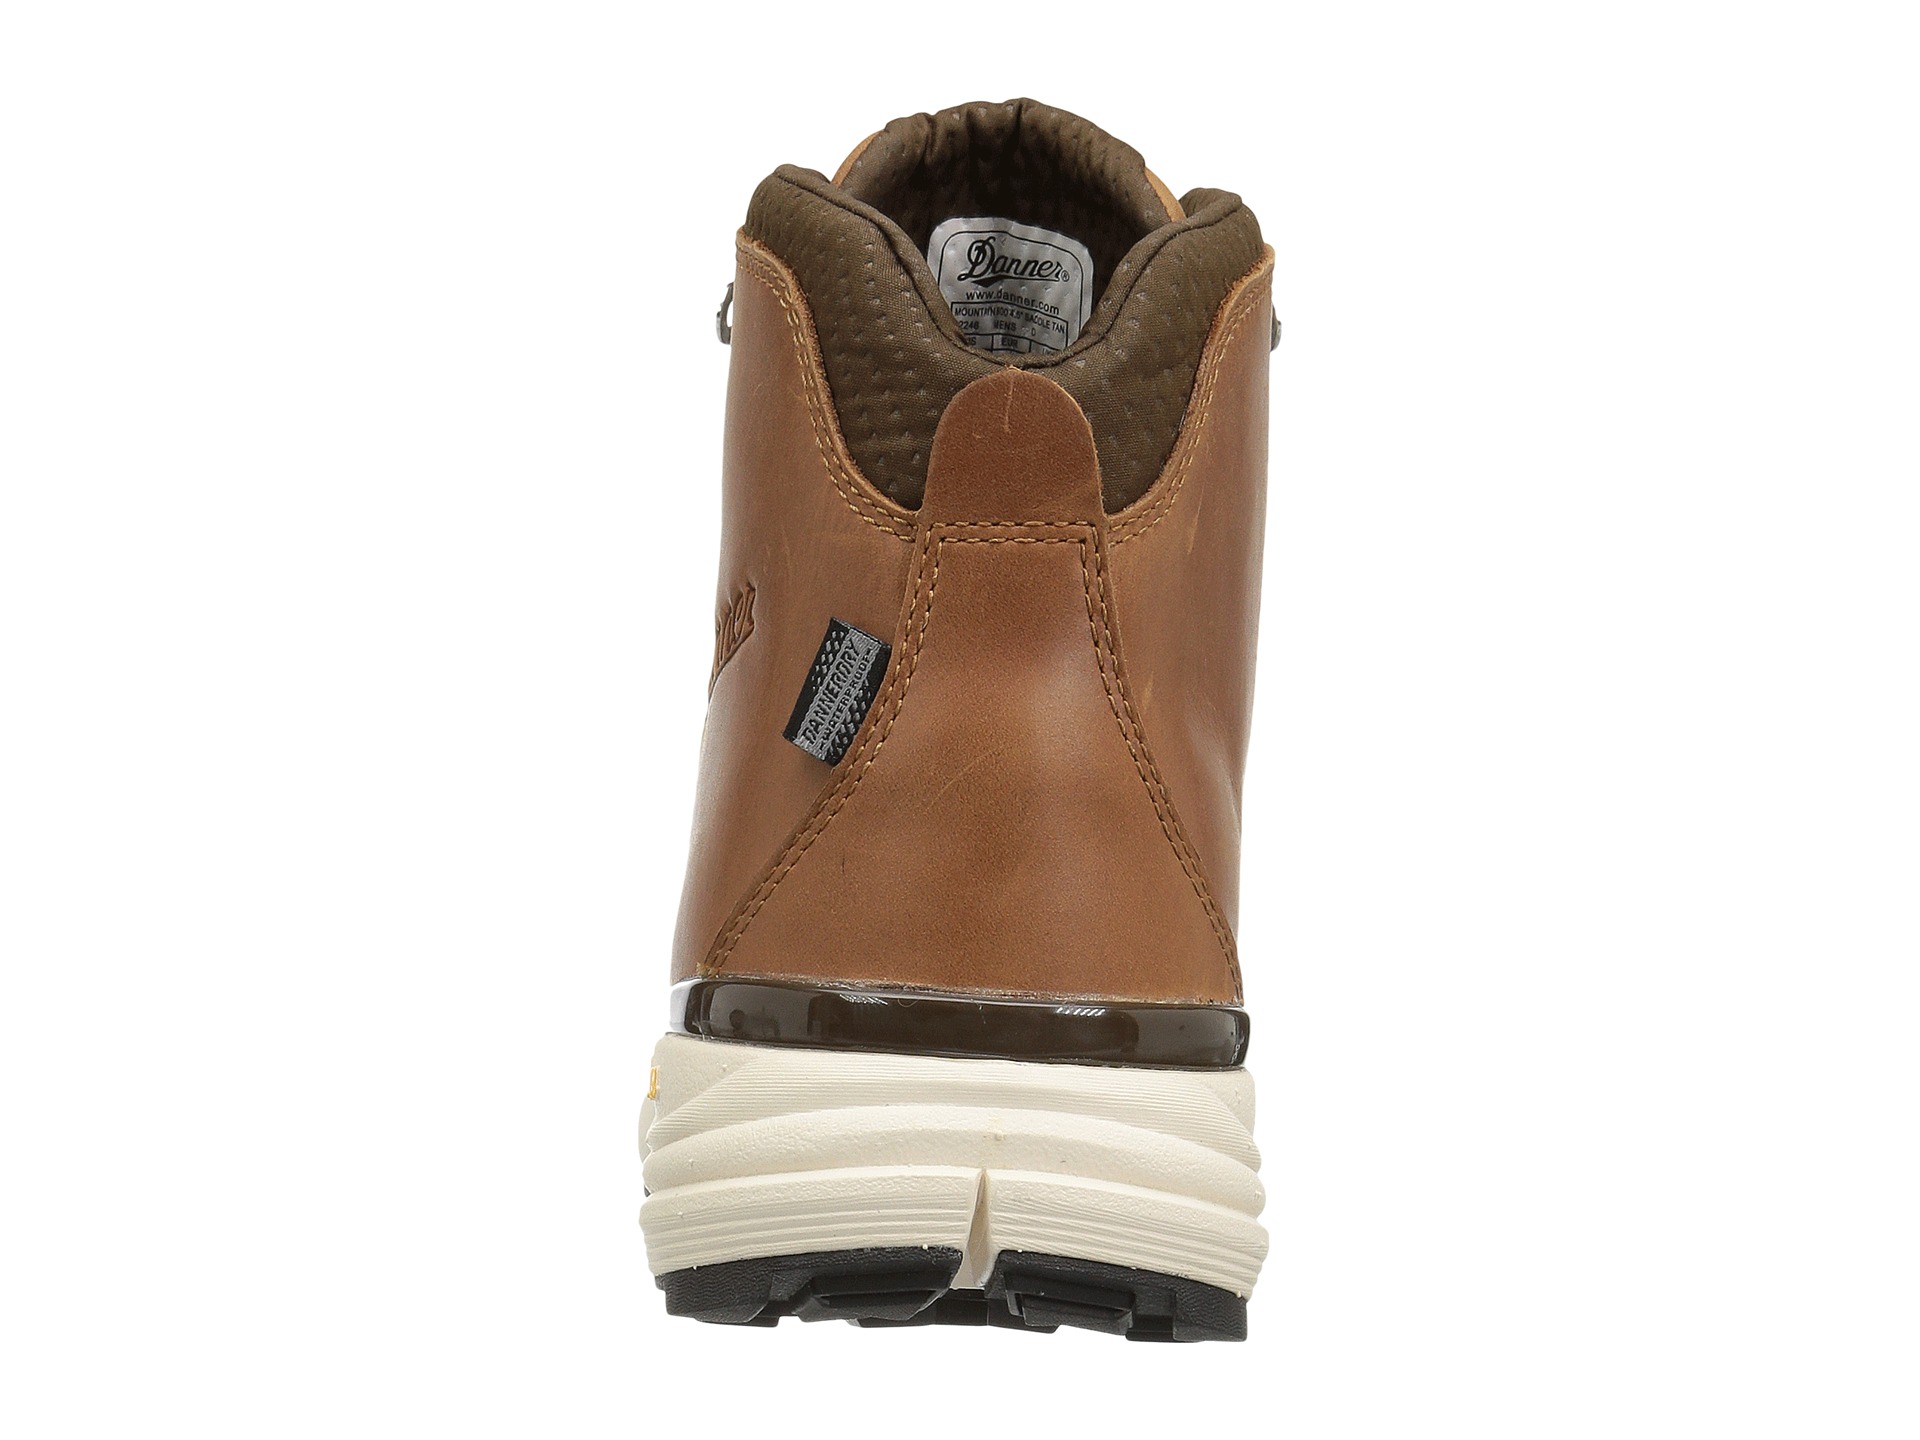 Danner Mountain 600 4.5" at Zappos.com